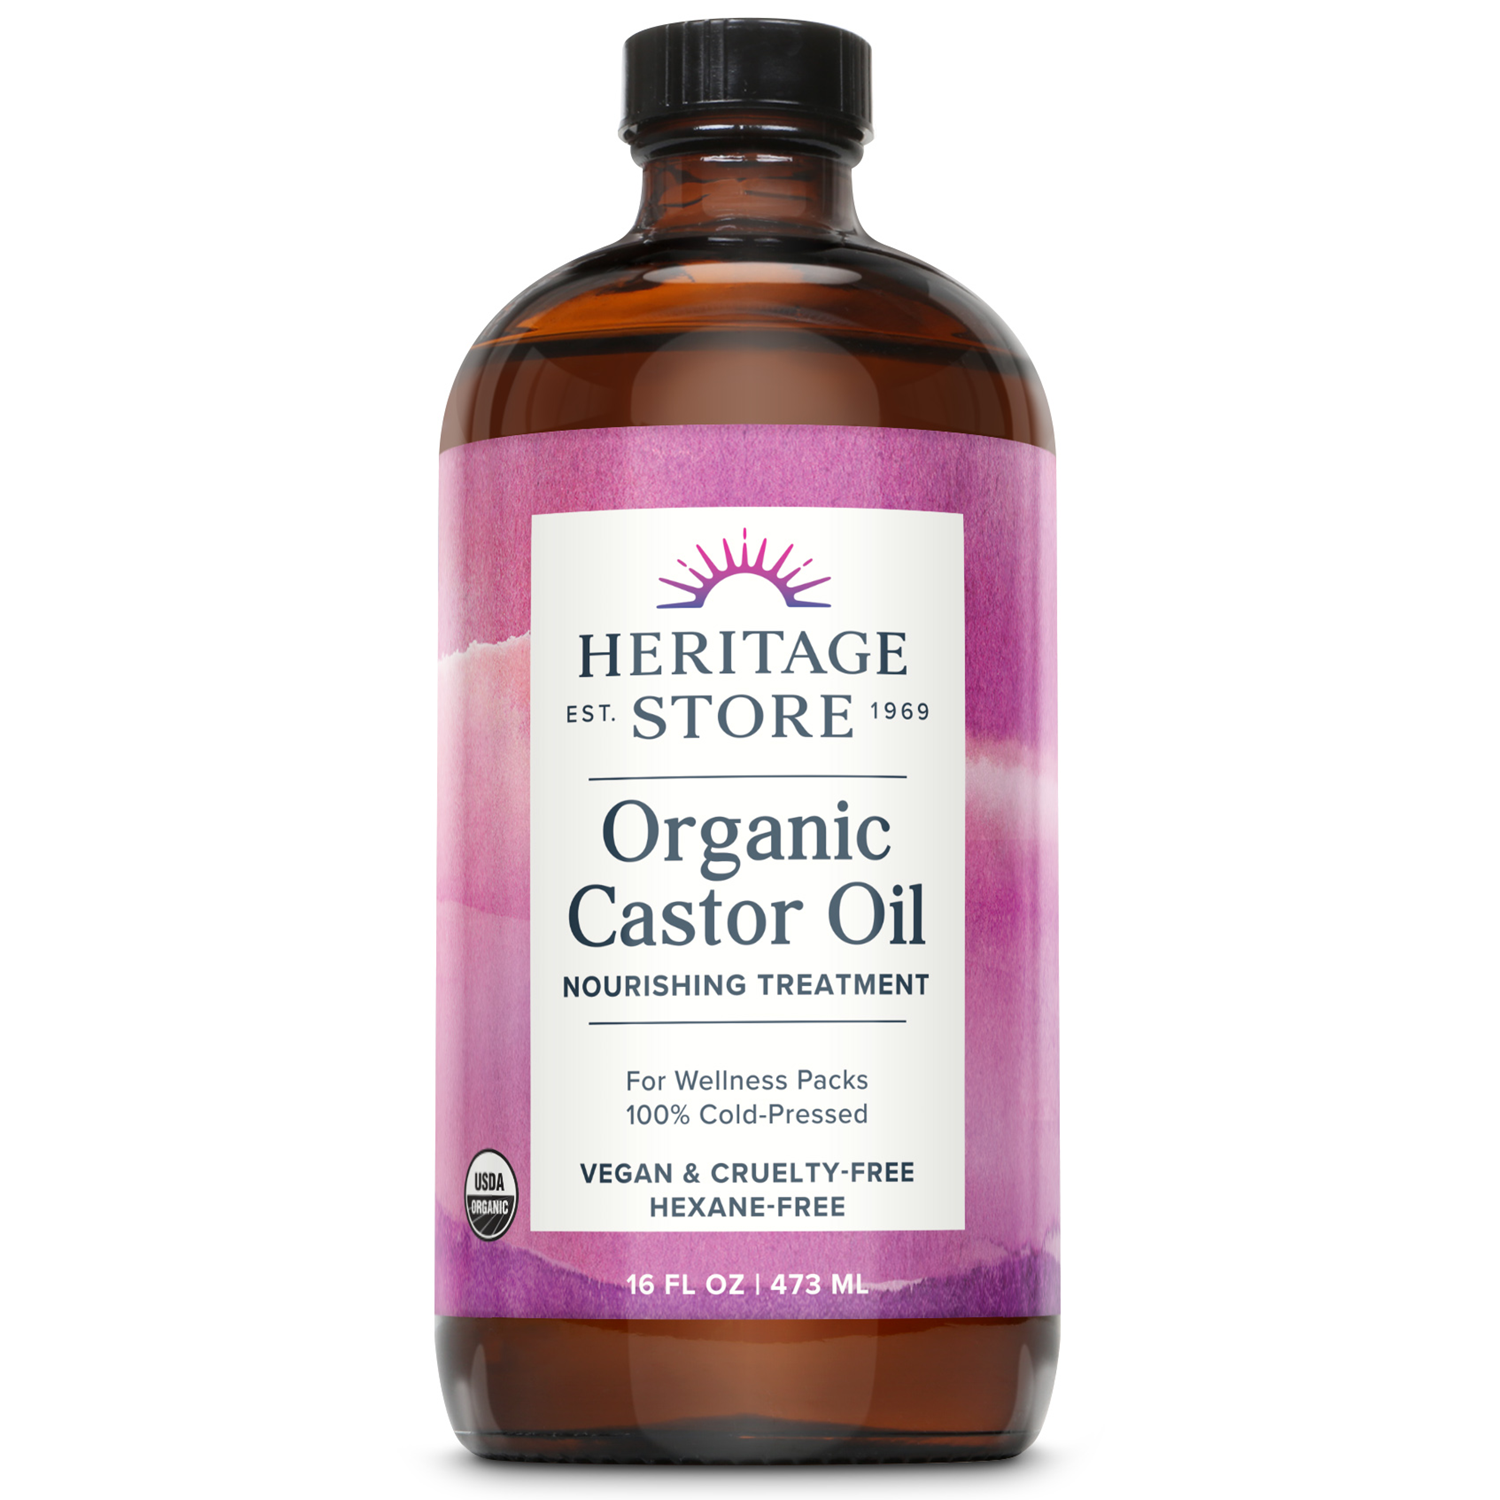 Heritage Store Organic Castor Oil, Cold Pressed | Rich Hydration for Hair & Skin, Bold Lashes & Brows, Hexane Free, 16oz - image 1 of 6